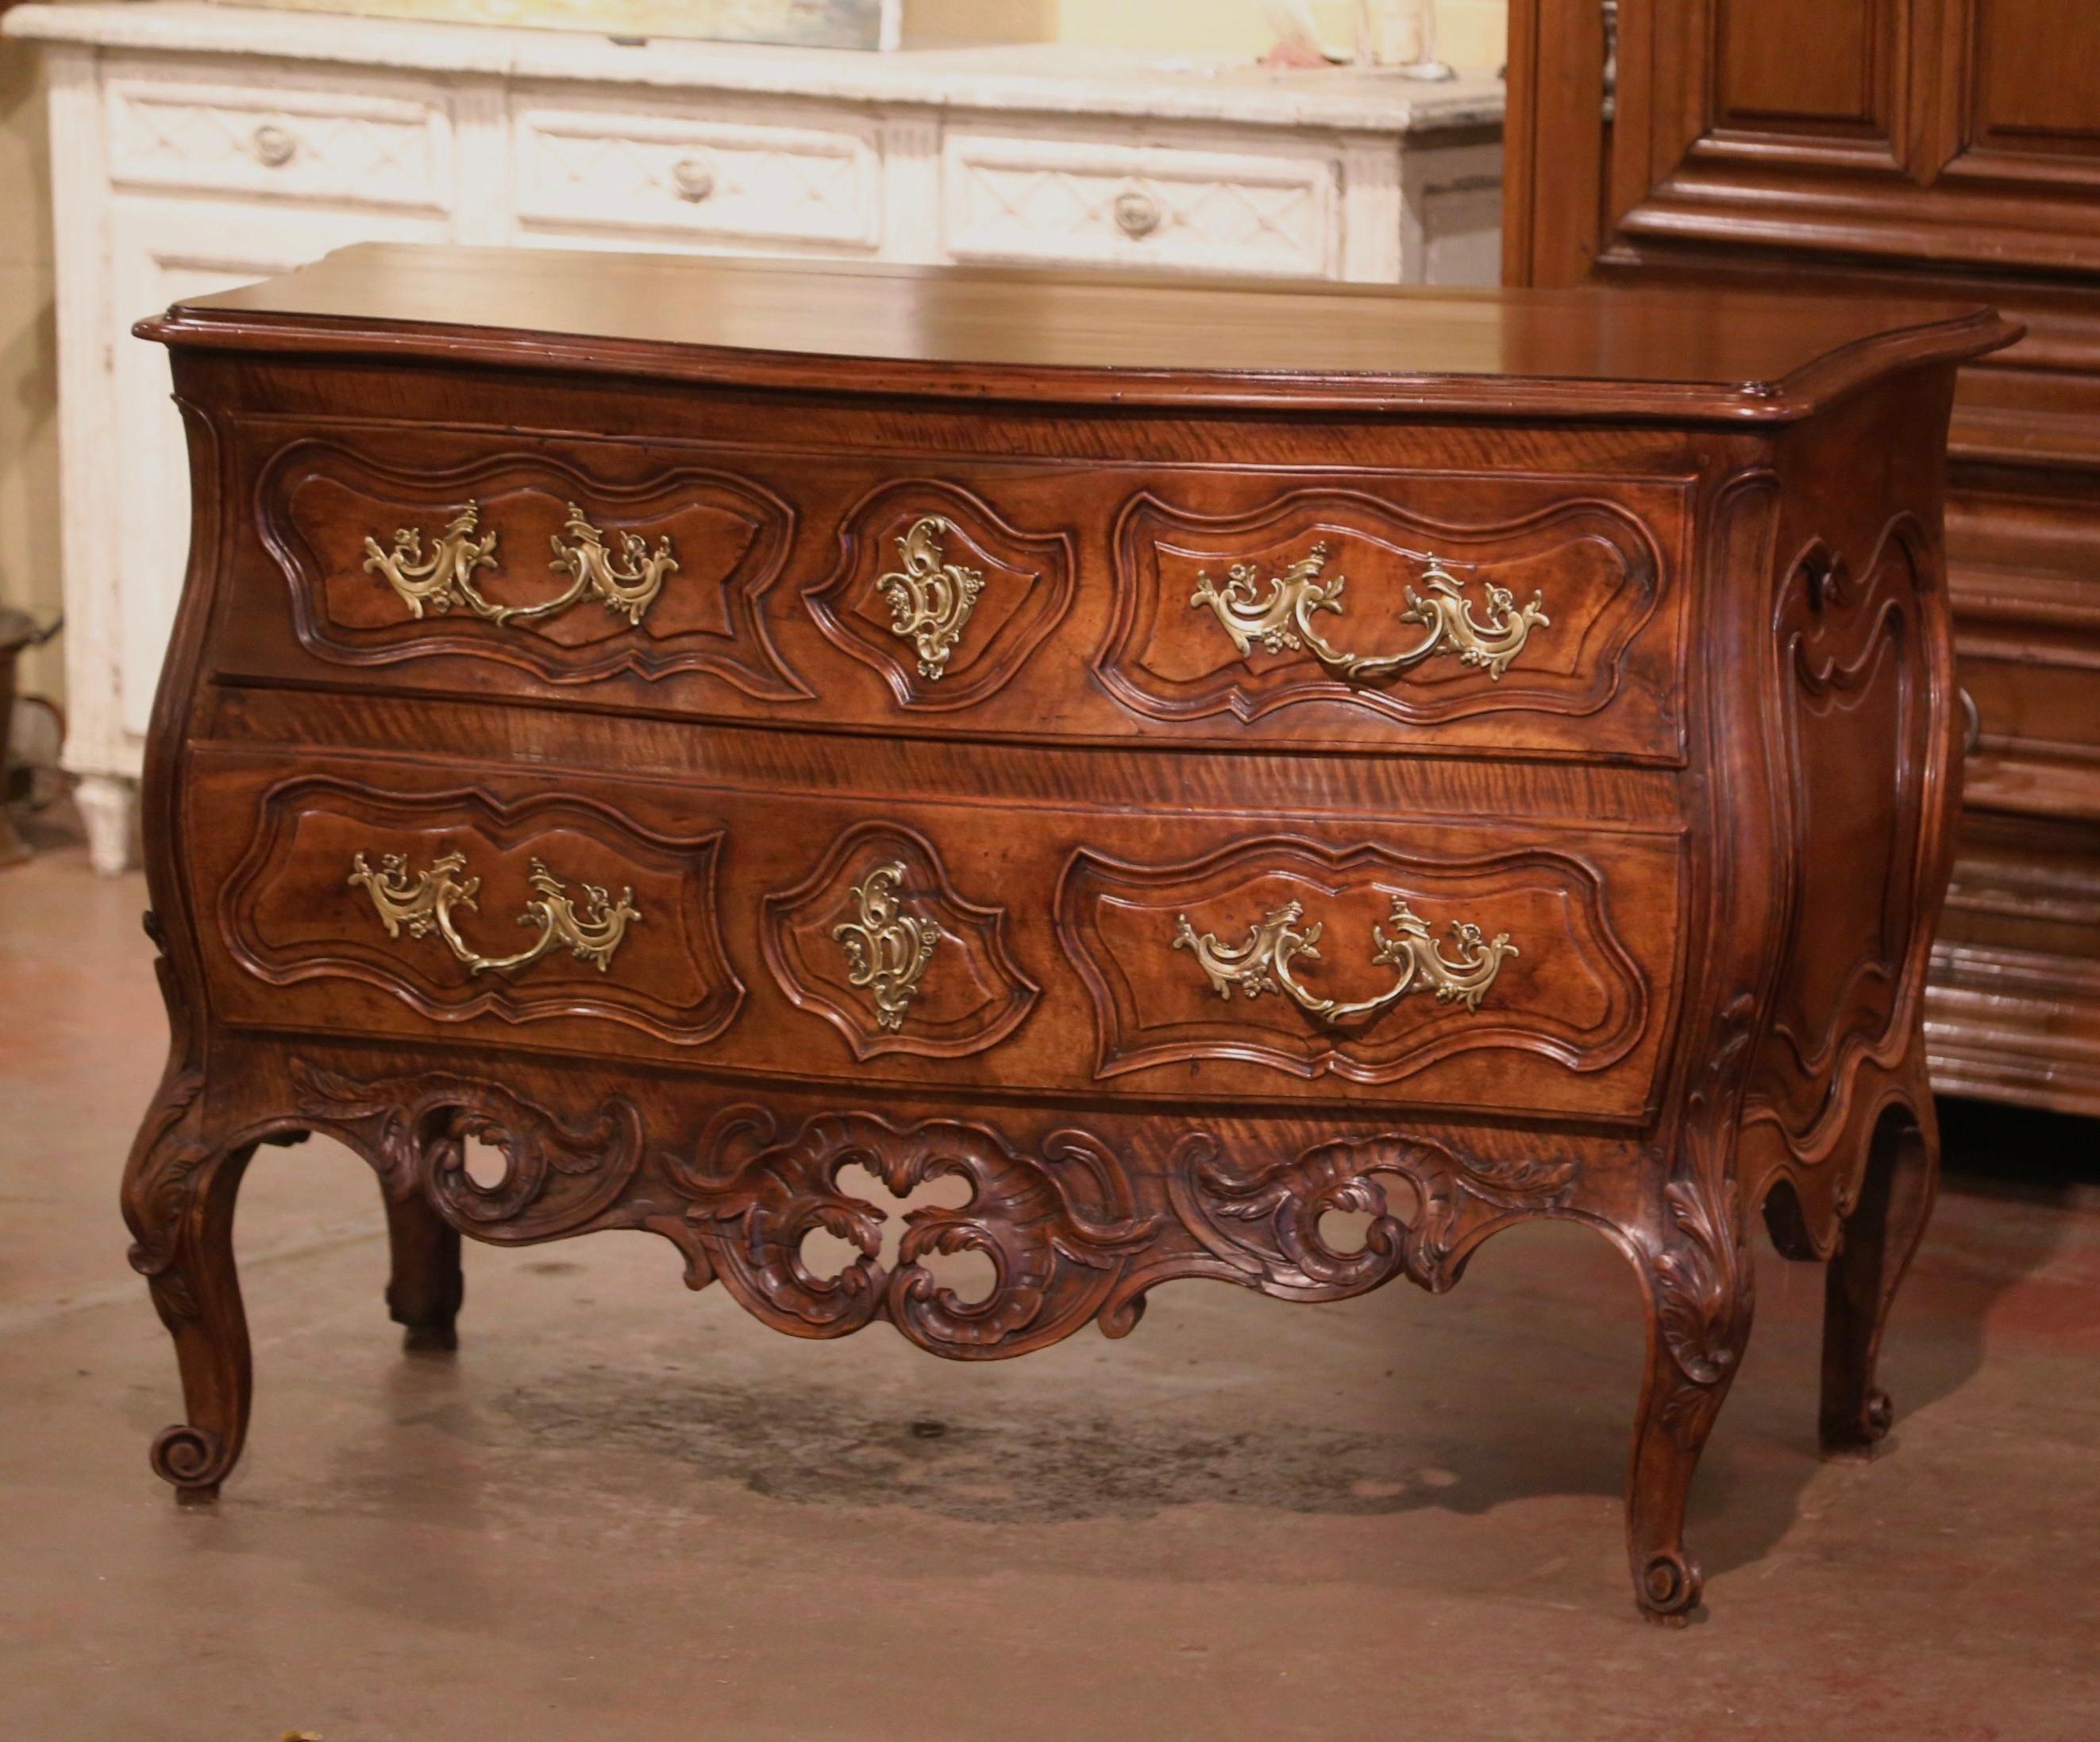 This important antique fruitwood commode was crafted in Nimes, Southern France circa 1750. The bombe chest on all sides, stands on cabriole legs decorated with acanthus leaves at the shoulder, and ending with escargot feet. The elegant scalloped and